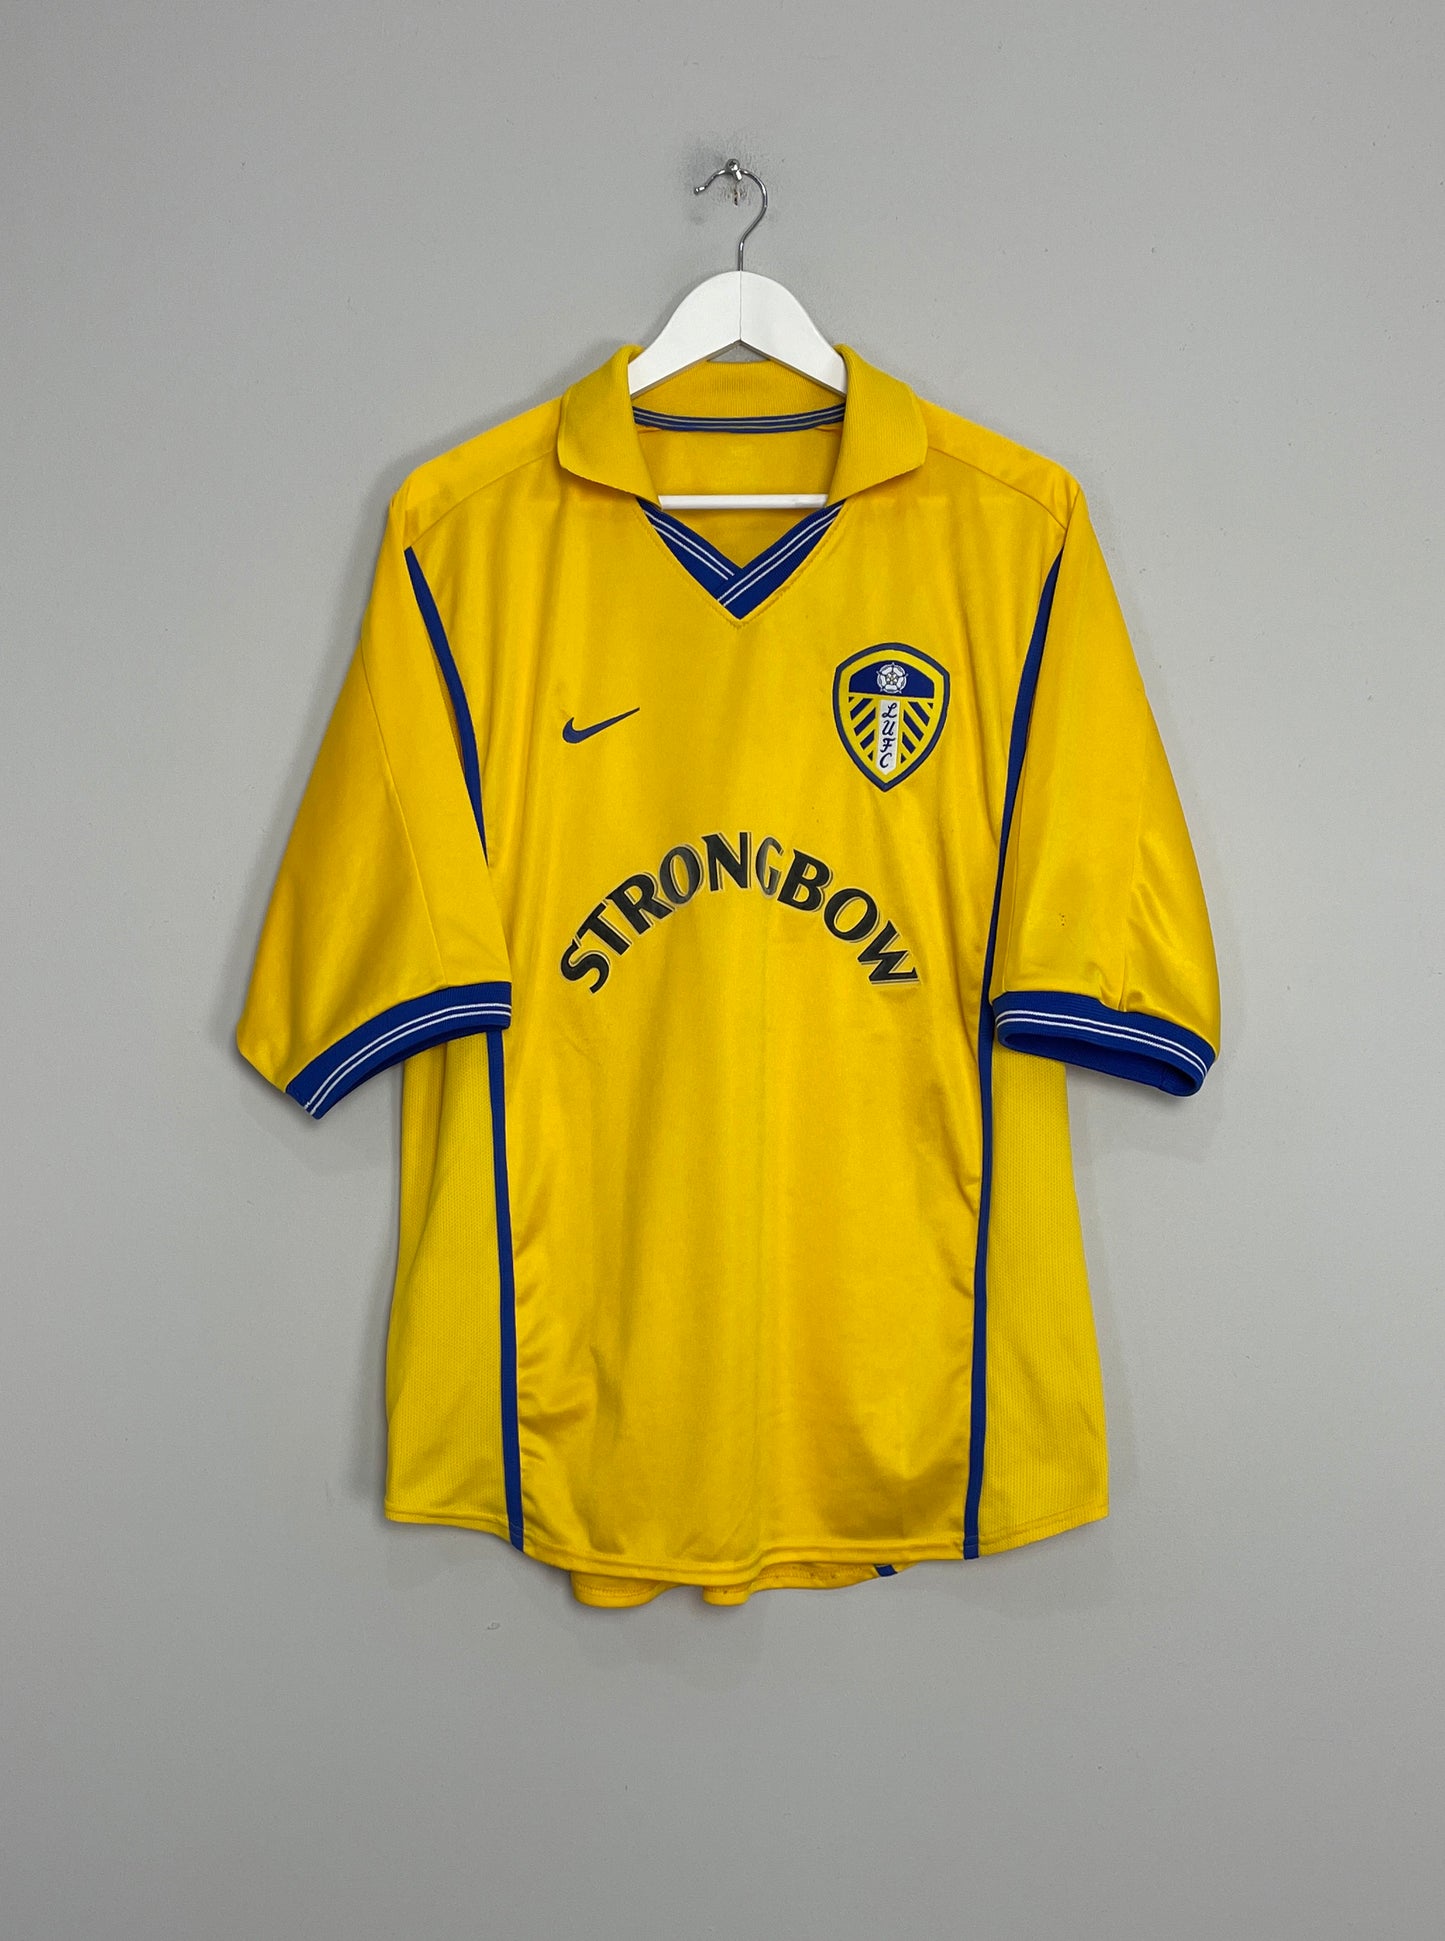 Image of the Leeds United shirt from the 2001/02 season